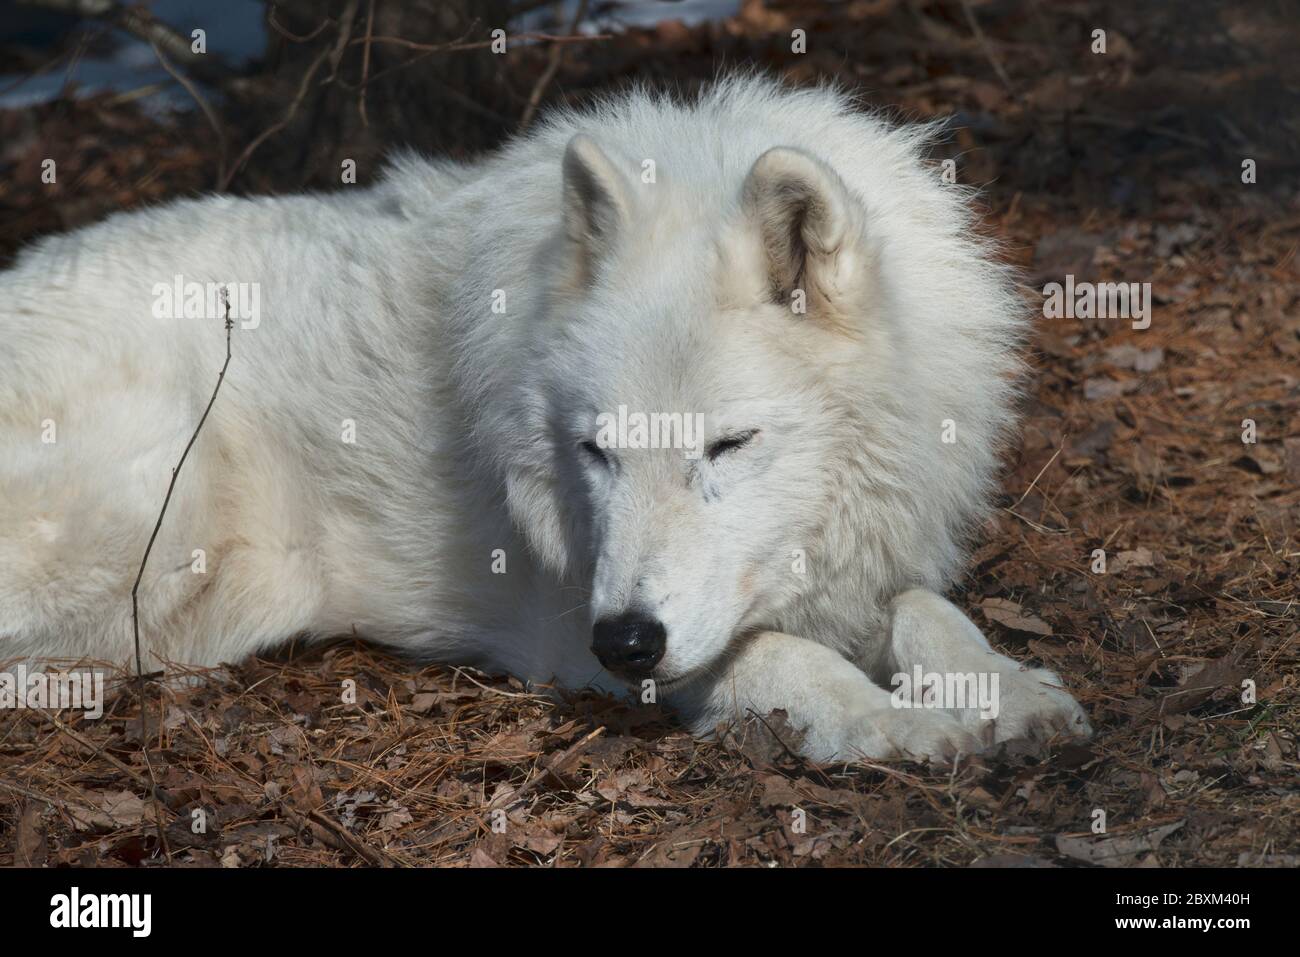 Arctic Wolf sleeping on a bed of fall leaves and pine needles Stock Photo